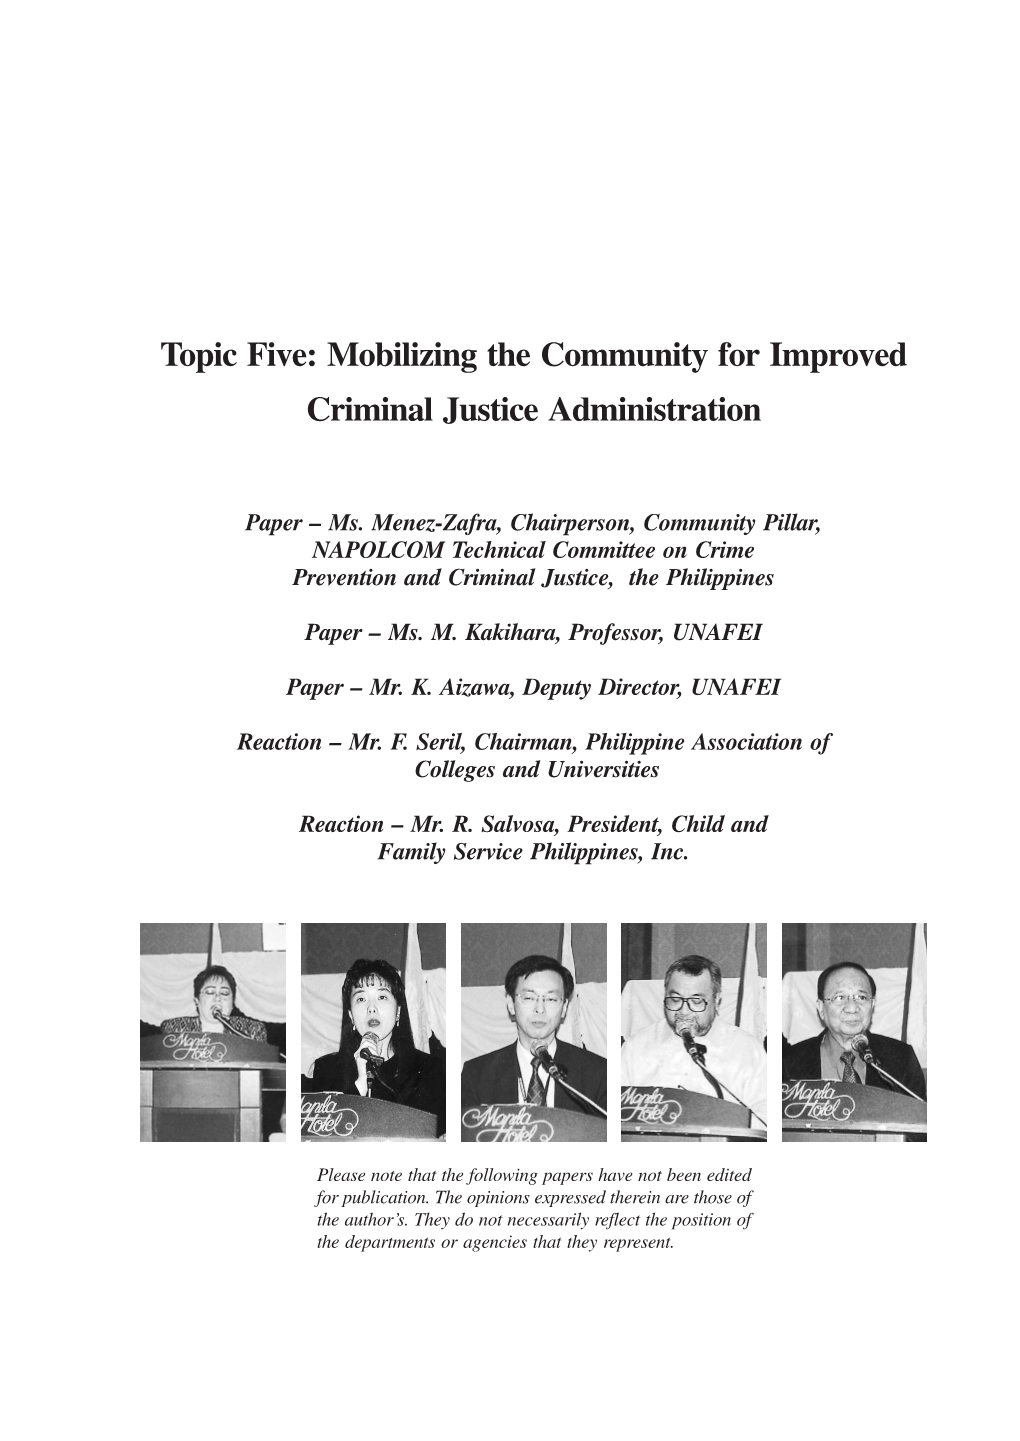 Topic Five: Mobilizing the Community for Improved Criminal Justice Administration